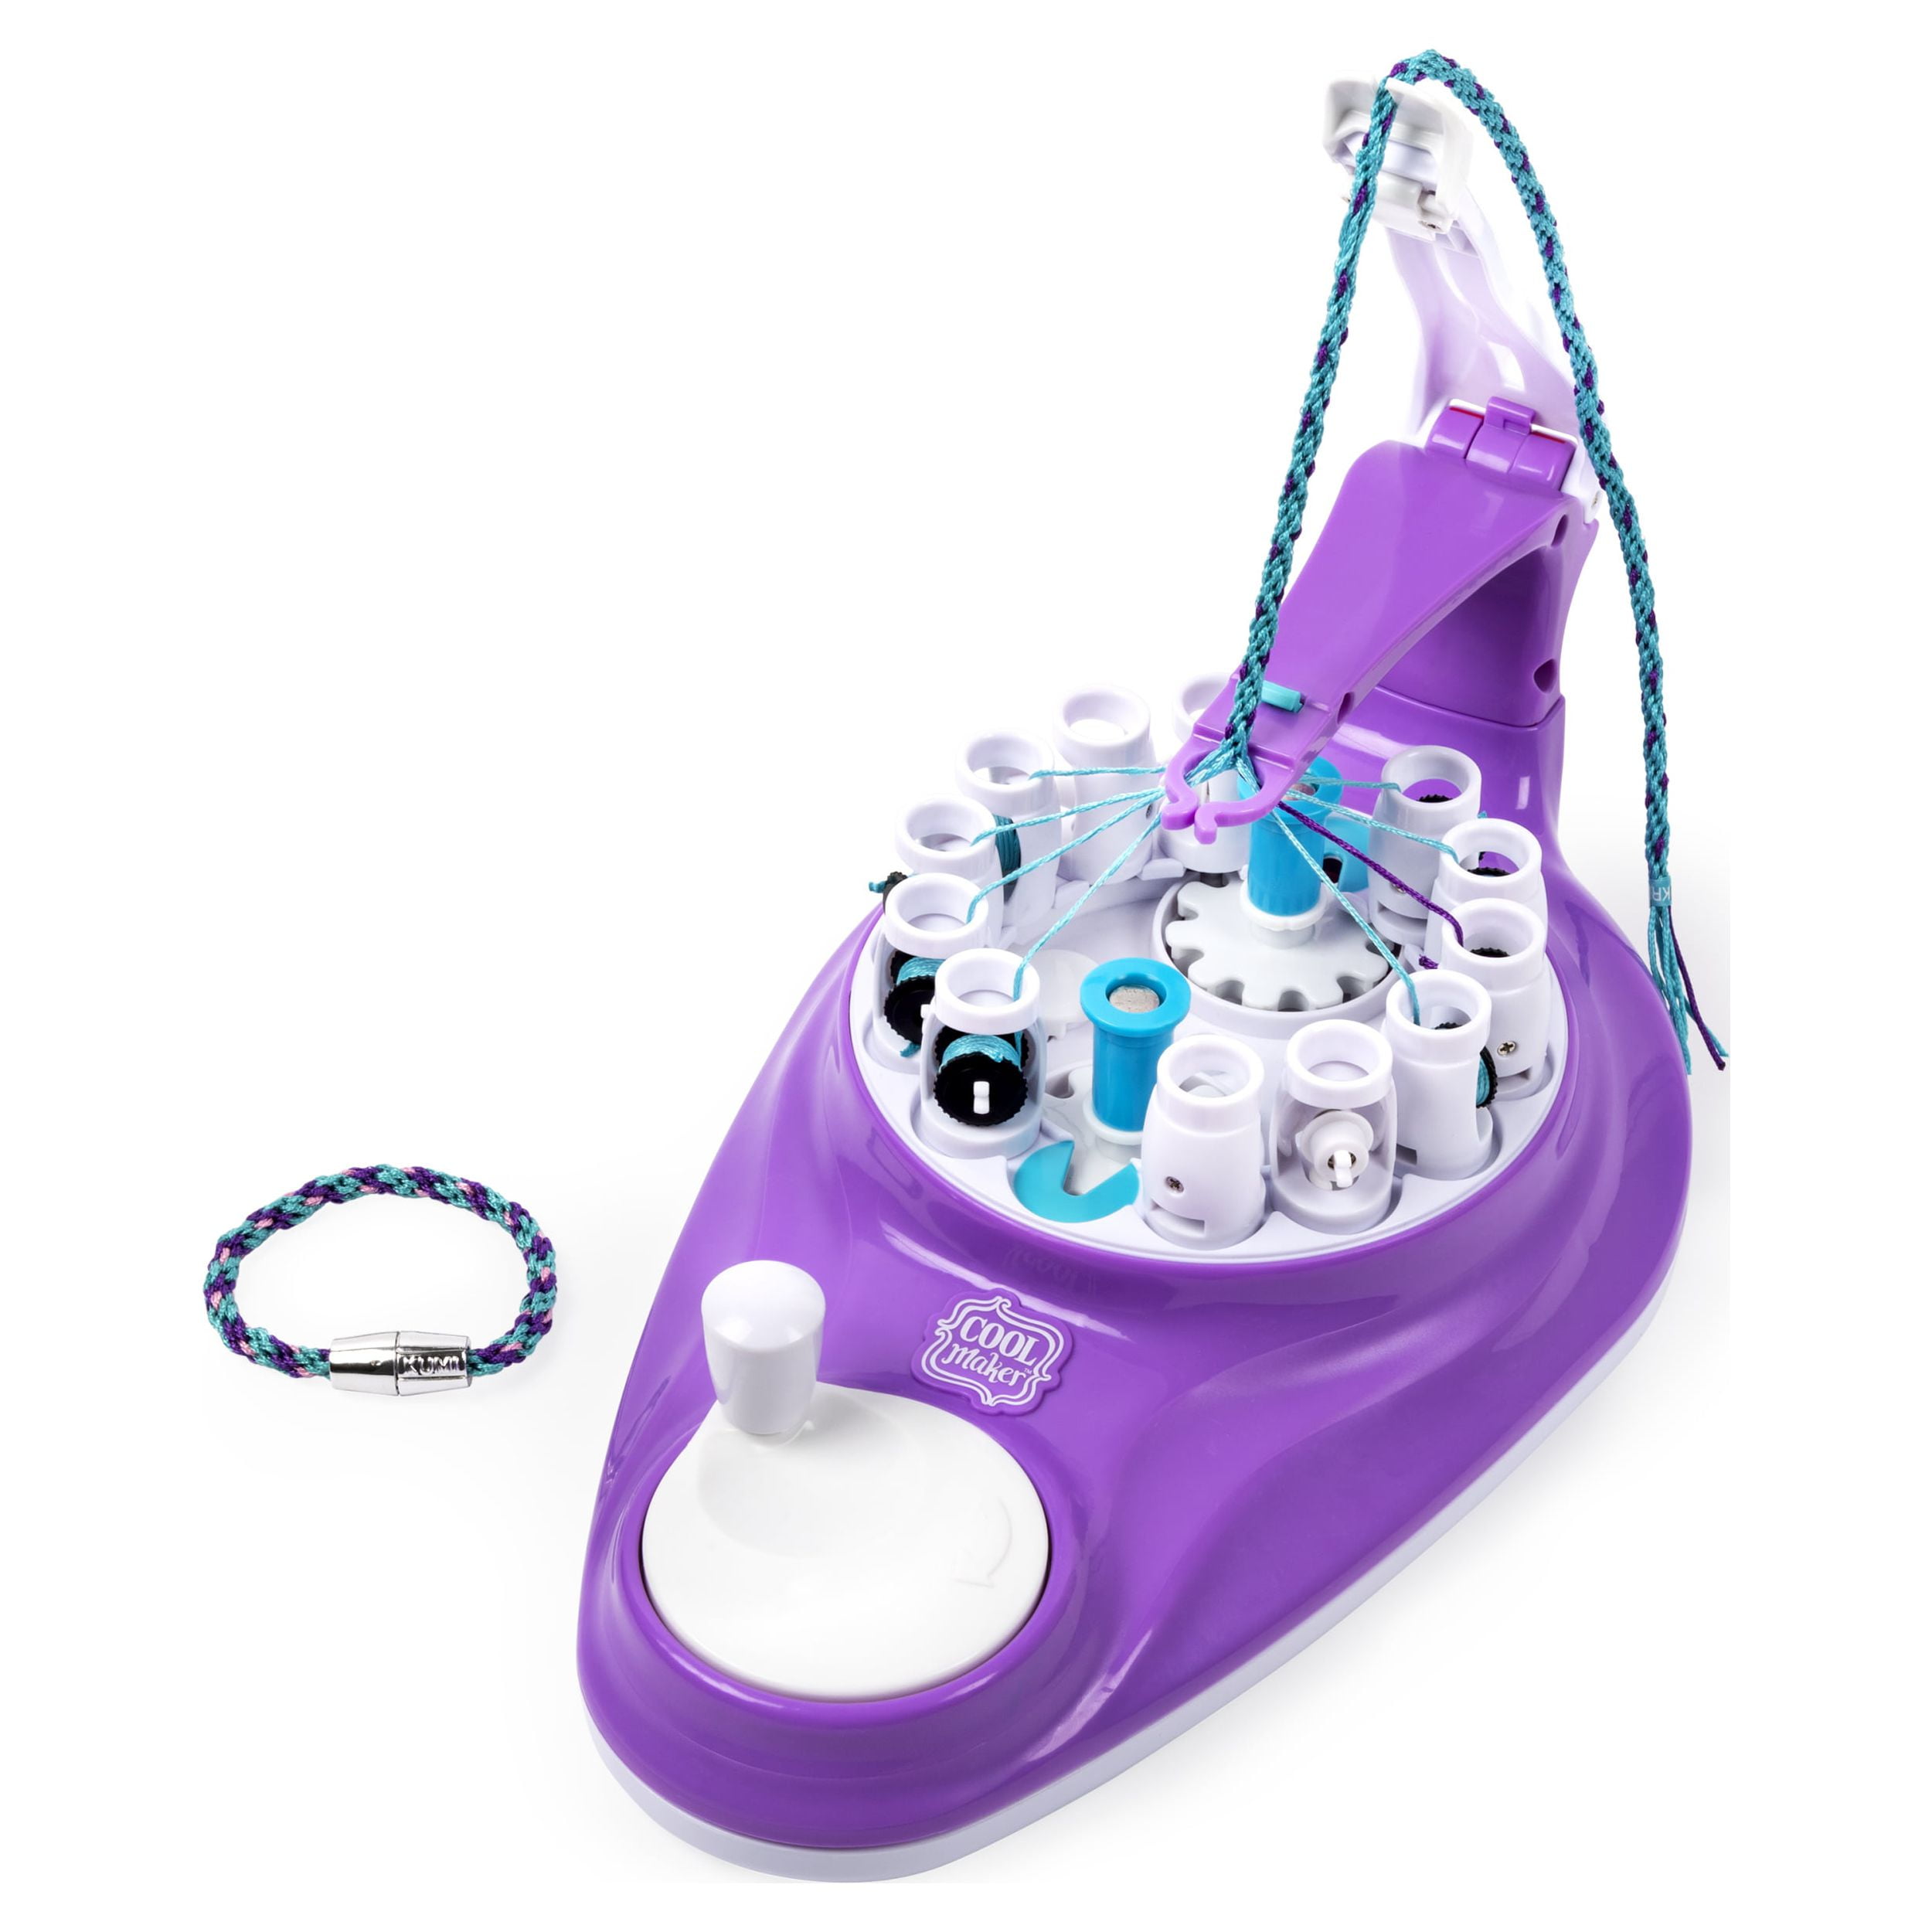 Cool Maker, 2-in-1 KumiKreator, Necklace and Friendship Bracelet Maker  Activity Kit, for Ages 8 and Up 